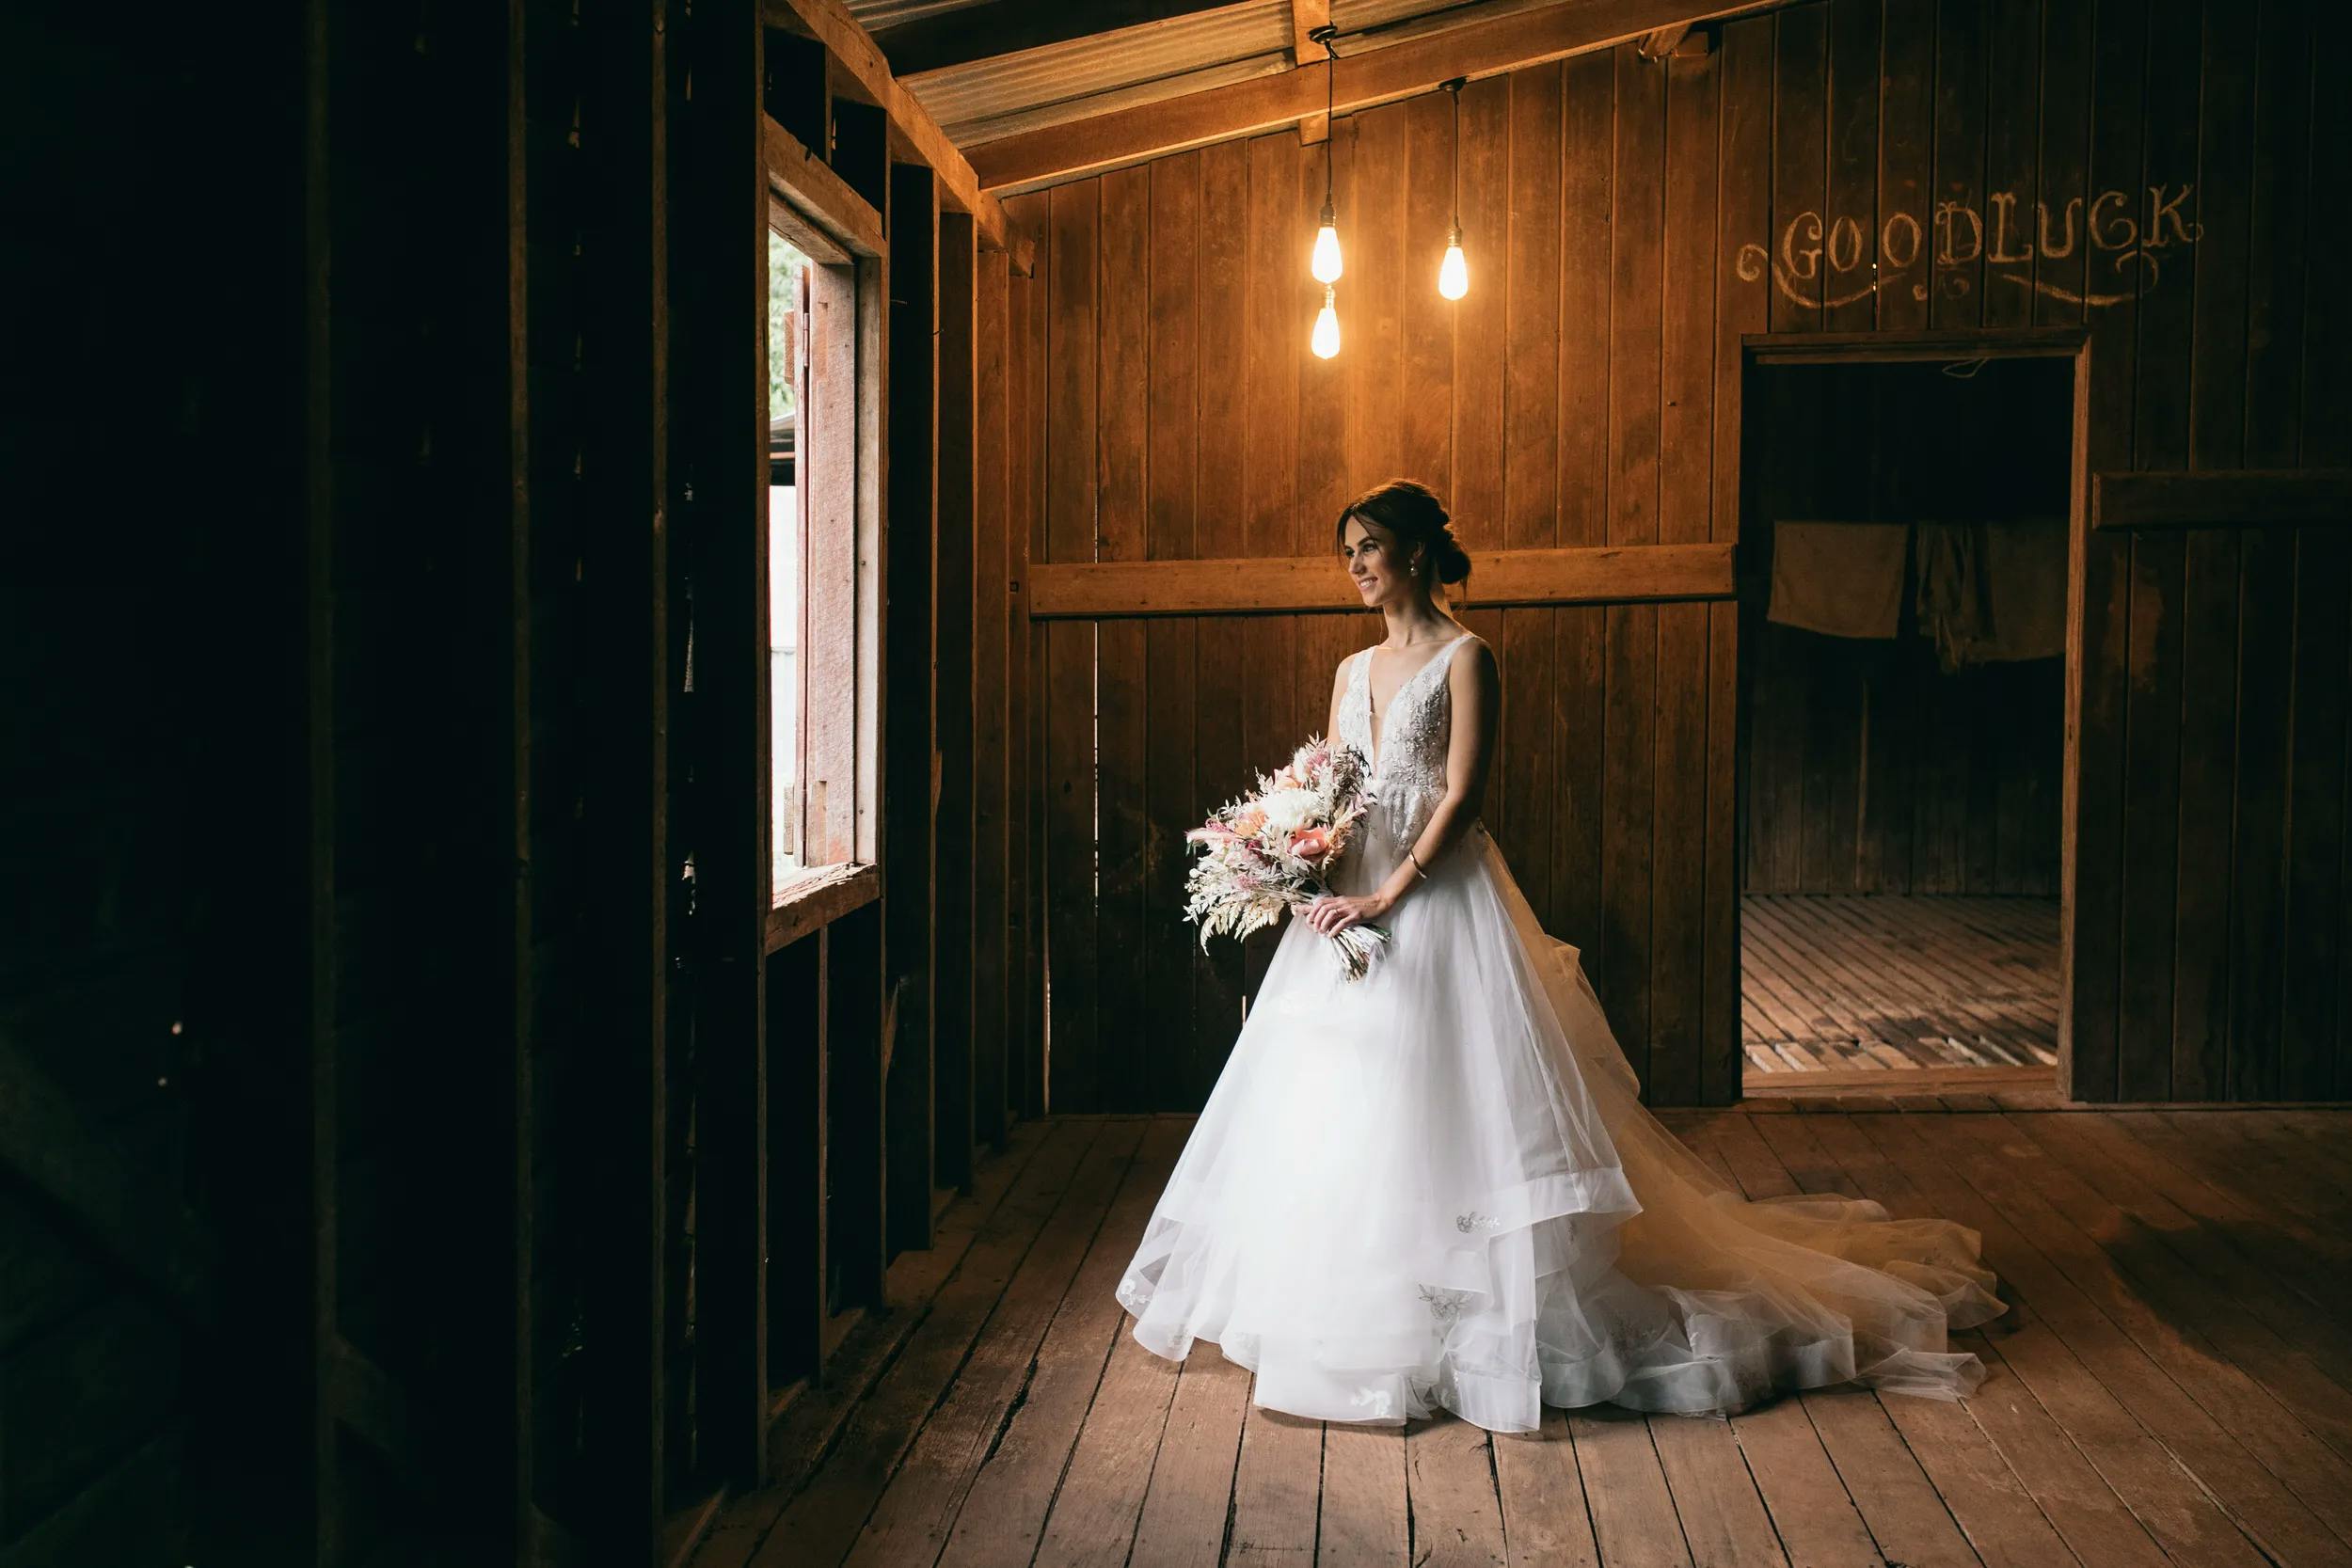 A bride in a white wedding dress stands inside a rustic wooden room with exposed beams, holding a bouquet of flowers. She gazes out of a window on her left as warm light bulbs hang from the ceiling, casting a soft glow. A sign reading "Good Luck" is on the back wall.